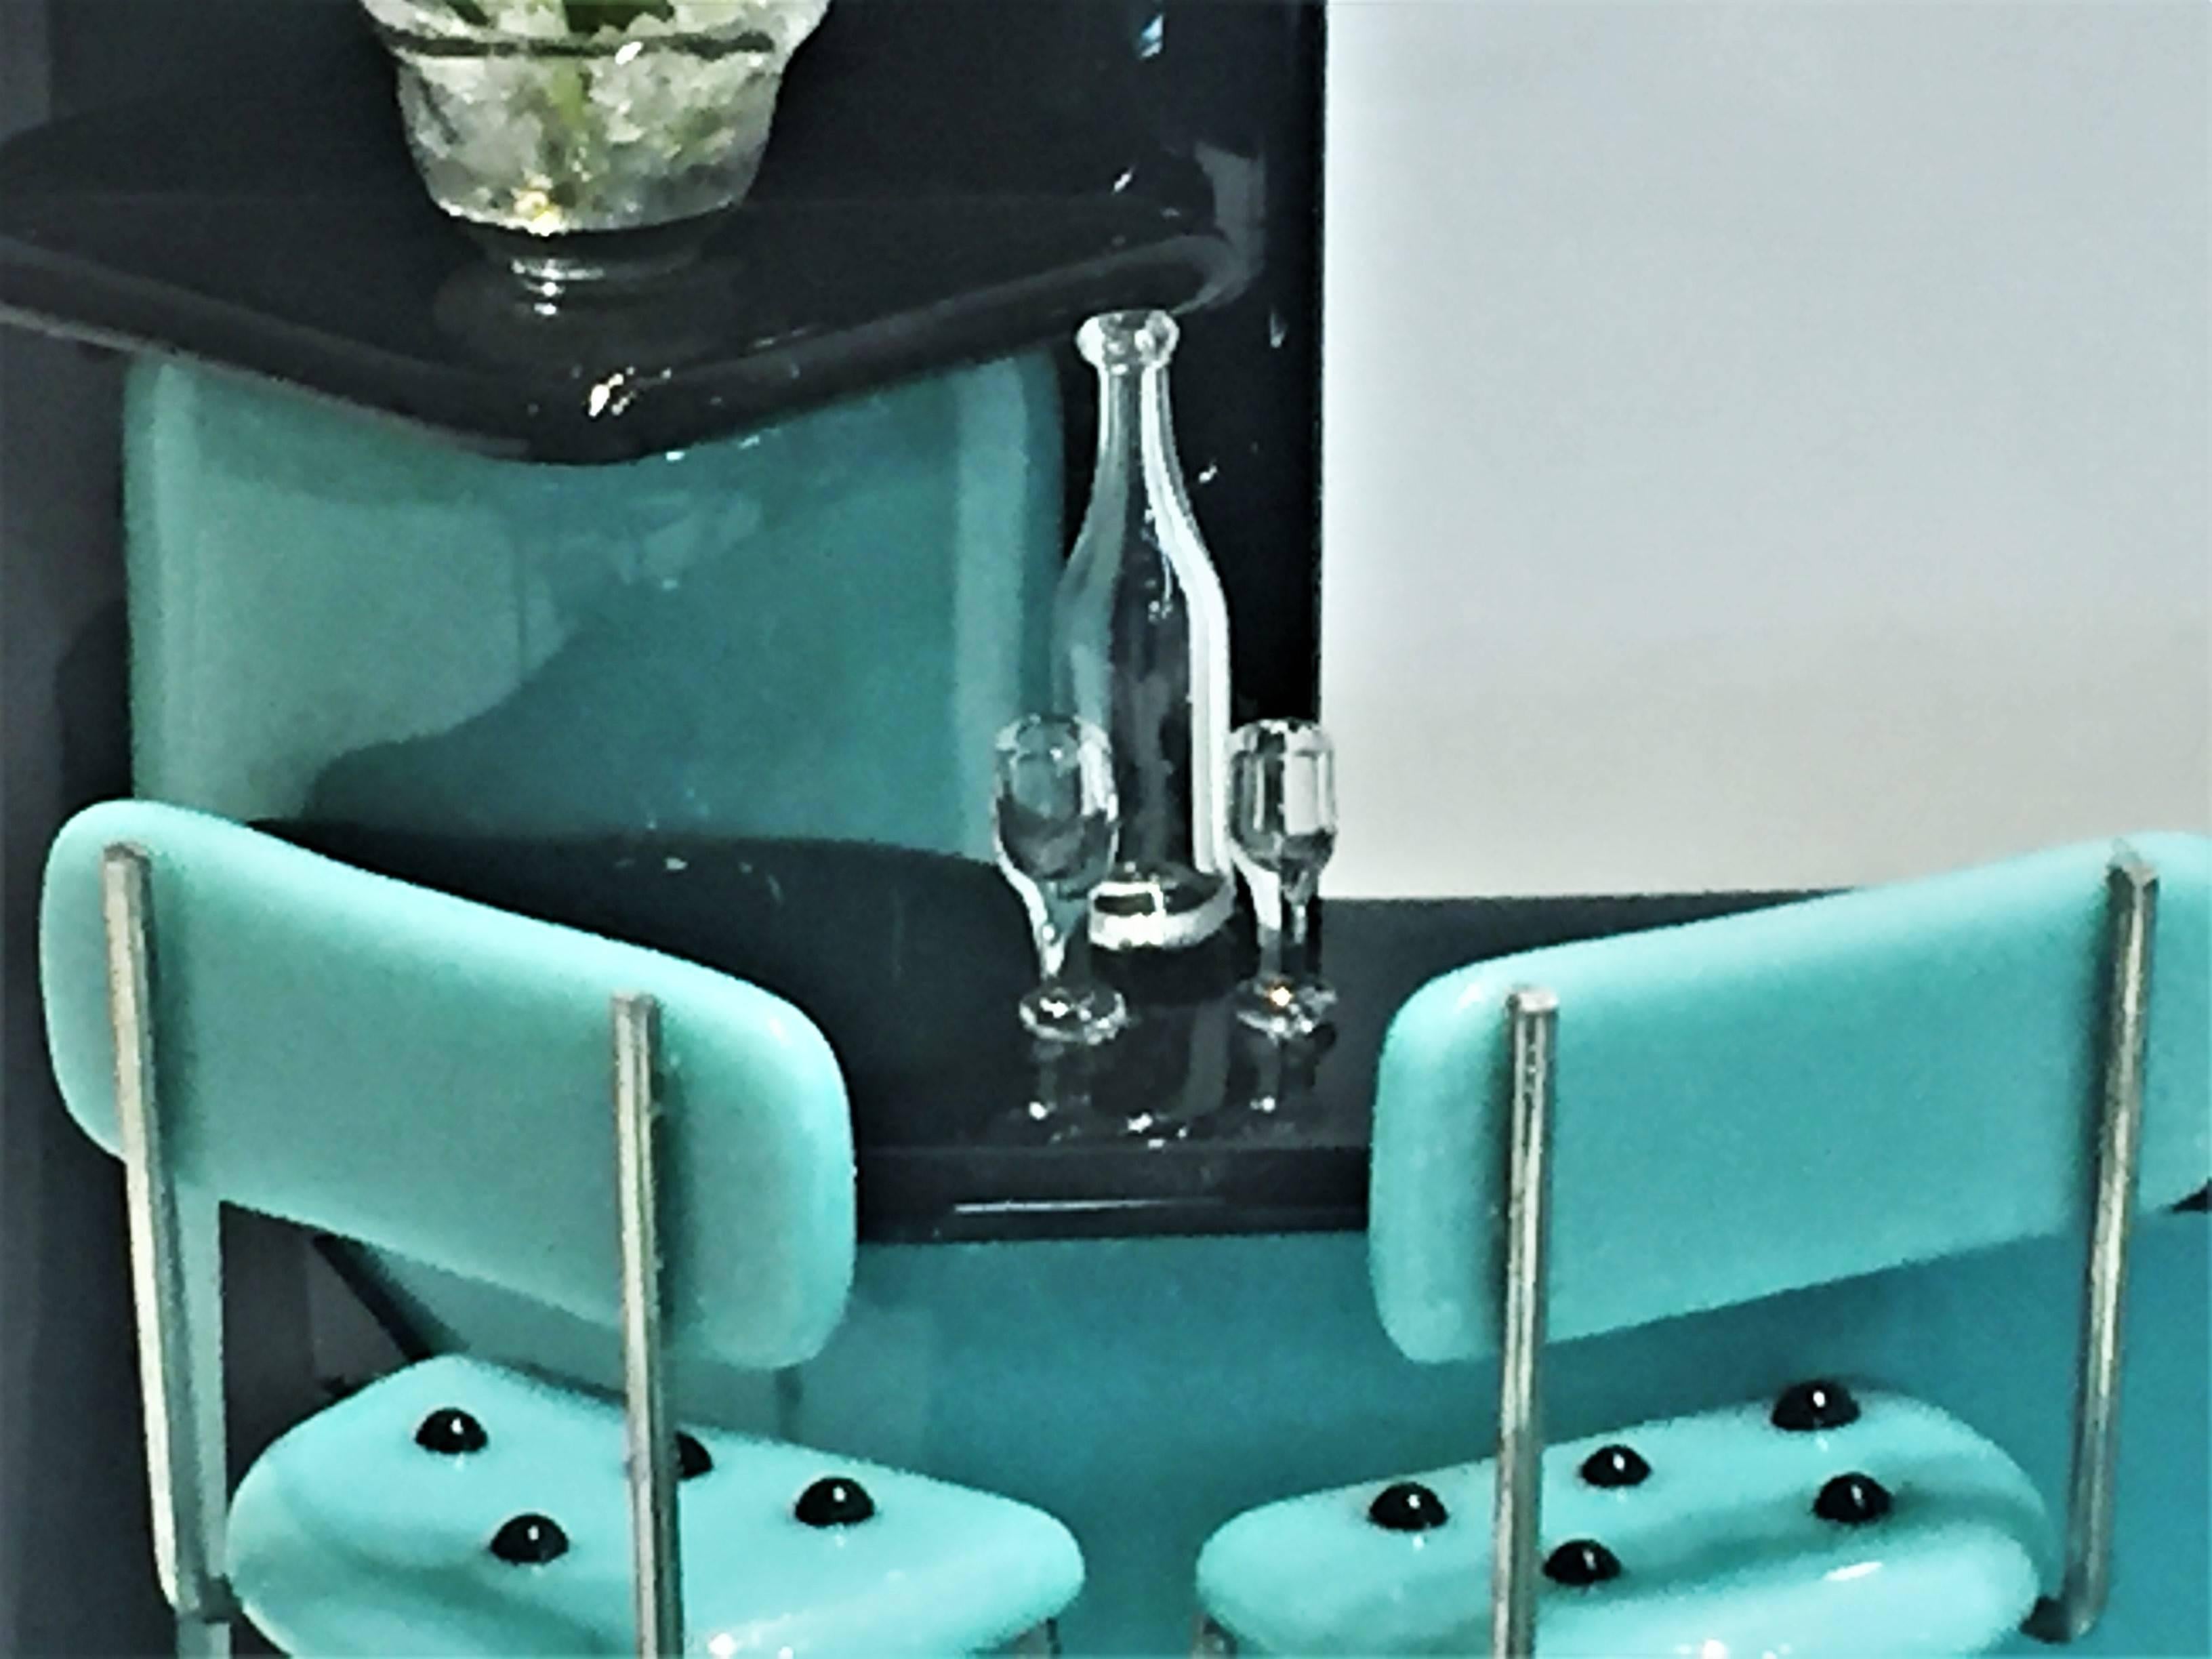 American Emily Brock, Turquoise and Black Bar, Art Glass Sculpture, 21st Century